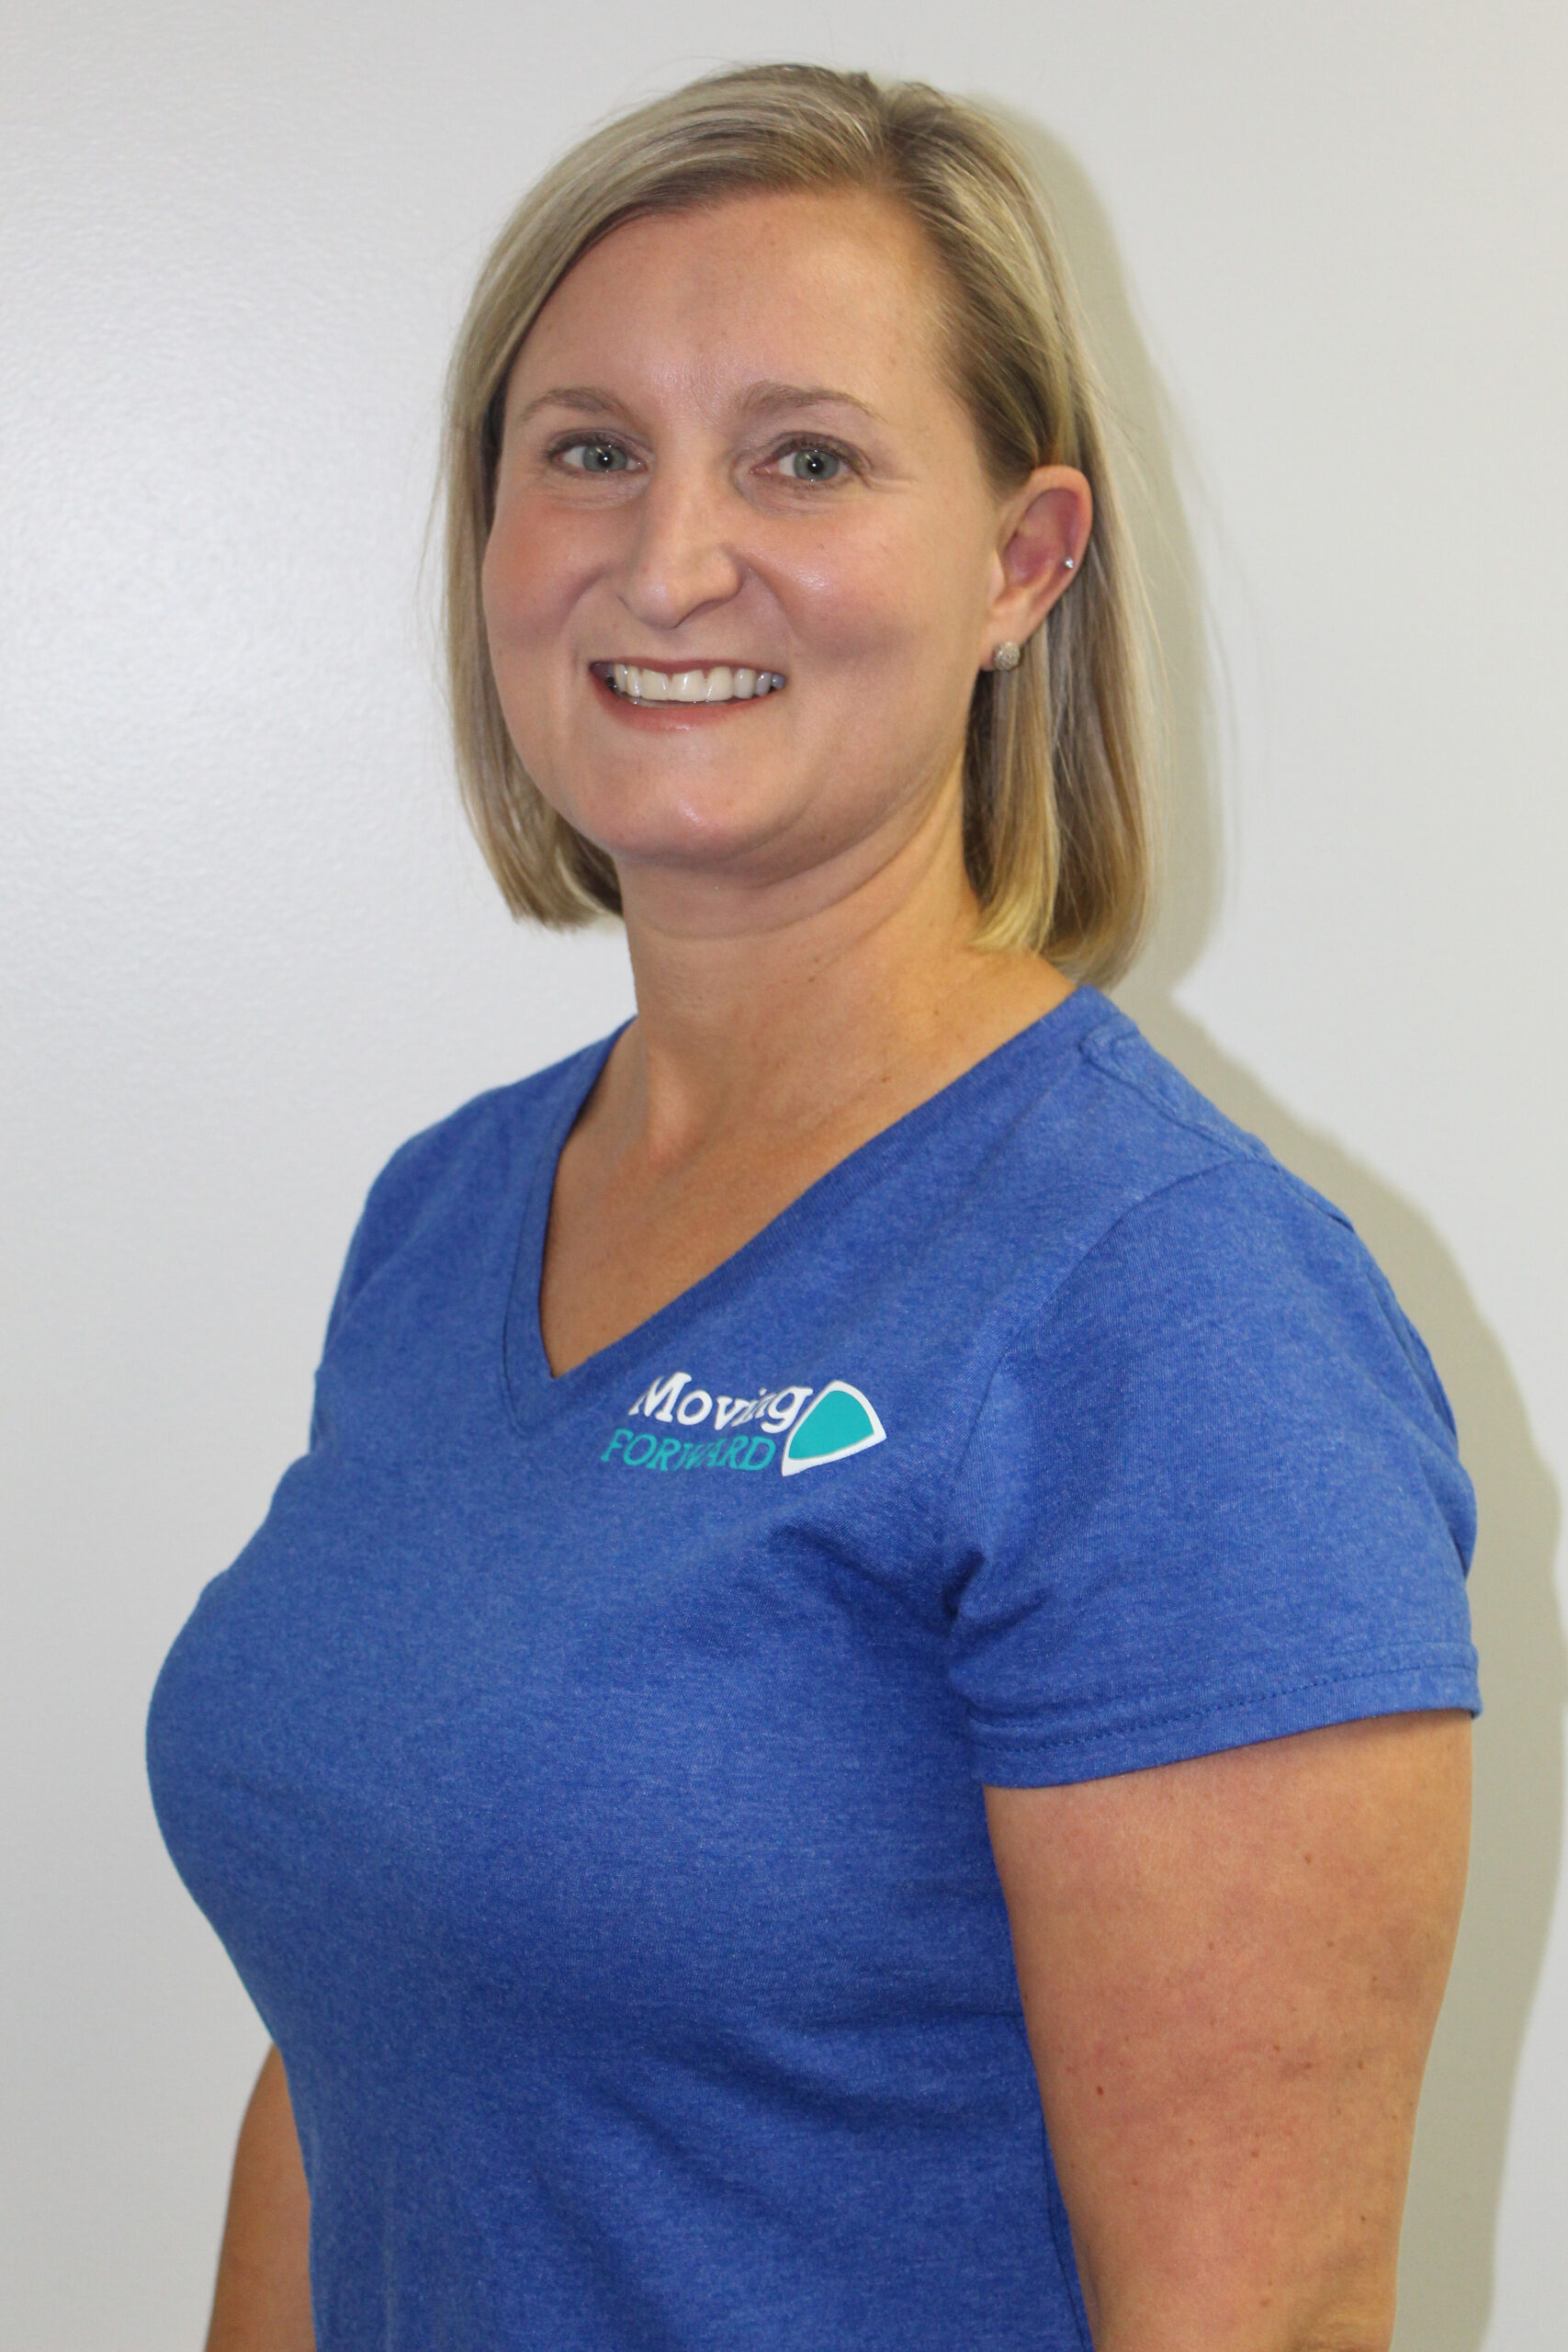 A picture of Katie Jones, a Physical Therapist at Moving Forward Wellness Center.